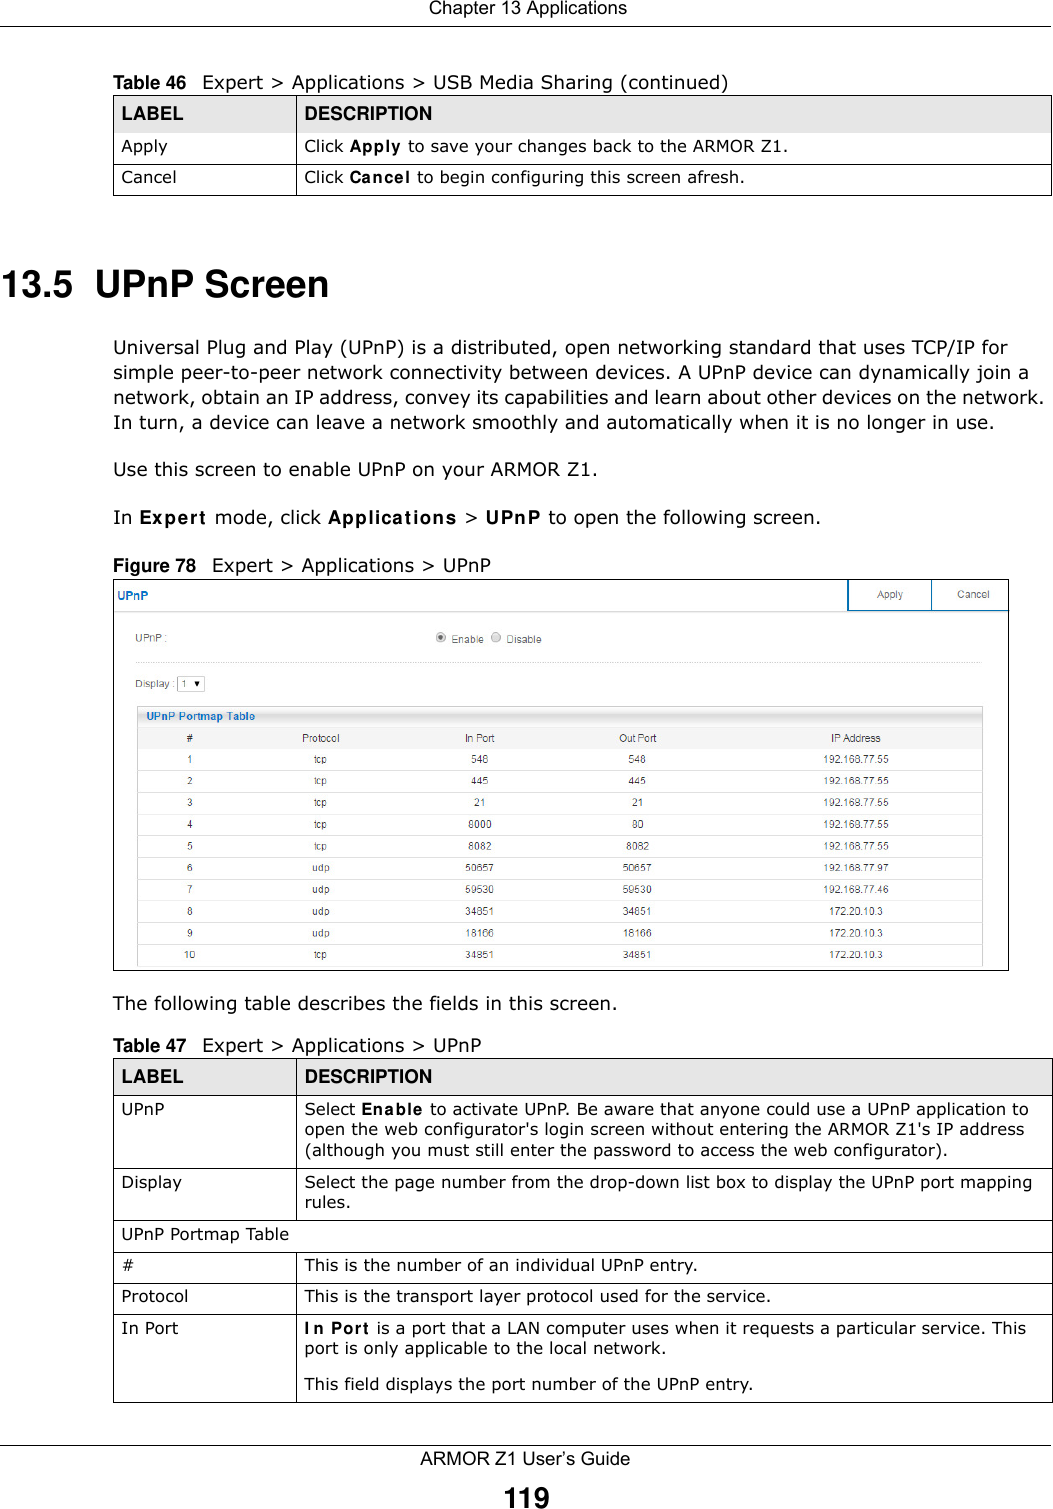  Chapter 13 ApplicationsARMOR Z1 User’s Guide11913.5  UPnP ScreenUniversal Plug and Play (UPnP) is a distributed, open networking standard that uses TCP/IP for simple peer-to-peer network connectivity between devices. A UPnP device can dynamically join a network, obtain an IP address, convey its capabilities and learn about other devices on the network. In turn, a device can leave a network smoothly and automatically when it is no longer in use.Use this screen to enable UPnP on your ARMOR Z1.In Expert mode, click Applications &gt; UPnP to open the following screen. Figure 78   Expert &gt; Applications &gt; UPnPThe following table describes the fields in this screen.Apply Click Apply to save your changes back to the ARMOR Z1.Cancel Click Cancel to begin configuring this screen afresh.Table 46   Expert &gt; Applications &gt; USB Media Sharing (continued)LABEL DESCRIPTIONTable 47   Expert &gt; Applications &gt; UPnPLABEL DESCRIPTIONUPnP Select Enable to activate UPnP. Be aware that anyone could use a UPnP application to open the web configurator&apos;s login screen without entering the ARMOR Z1&apos;s IP address (although you must still enter the password to access the web configurator).Display Select the page number from the drop-down list box to display the UPnP port mapping rules.UPnP Portmap Table#This is the number of an individual UPnP entry.Protocol This is the transport layer protocol used for the service.In Port In Port is a port that a LAN computer uses when it requests a particular service. This port is only applicable to the local network. This field displays the port number of the UPnP entry.